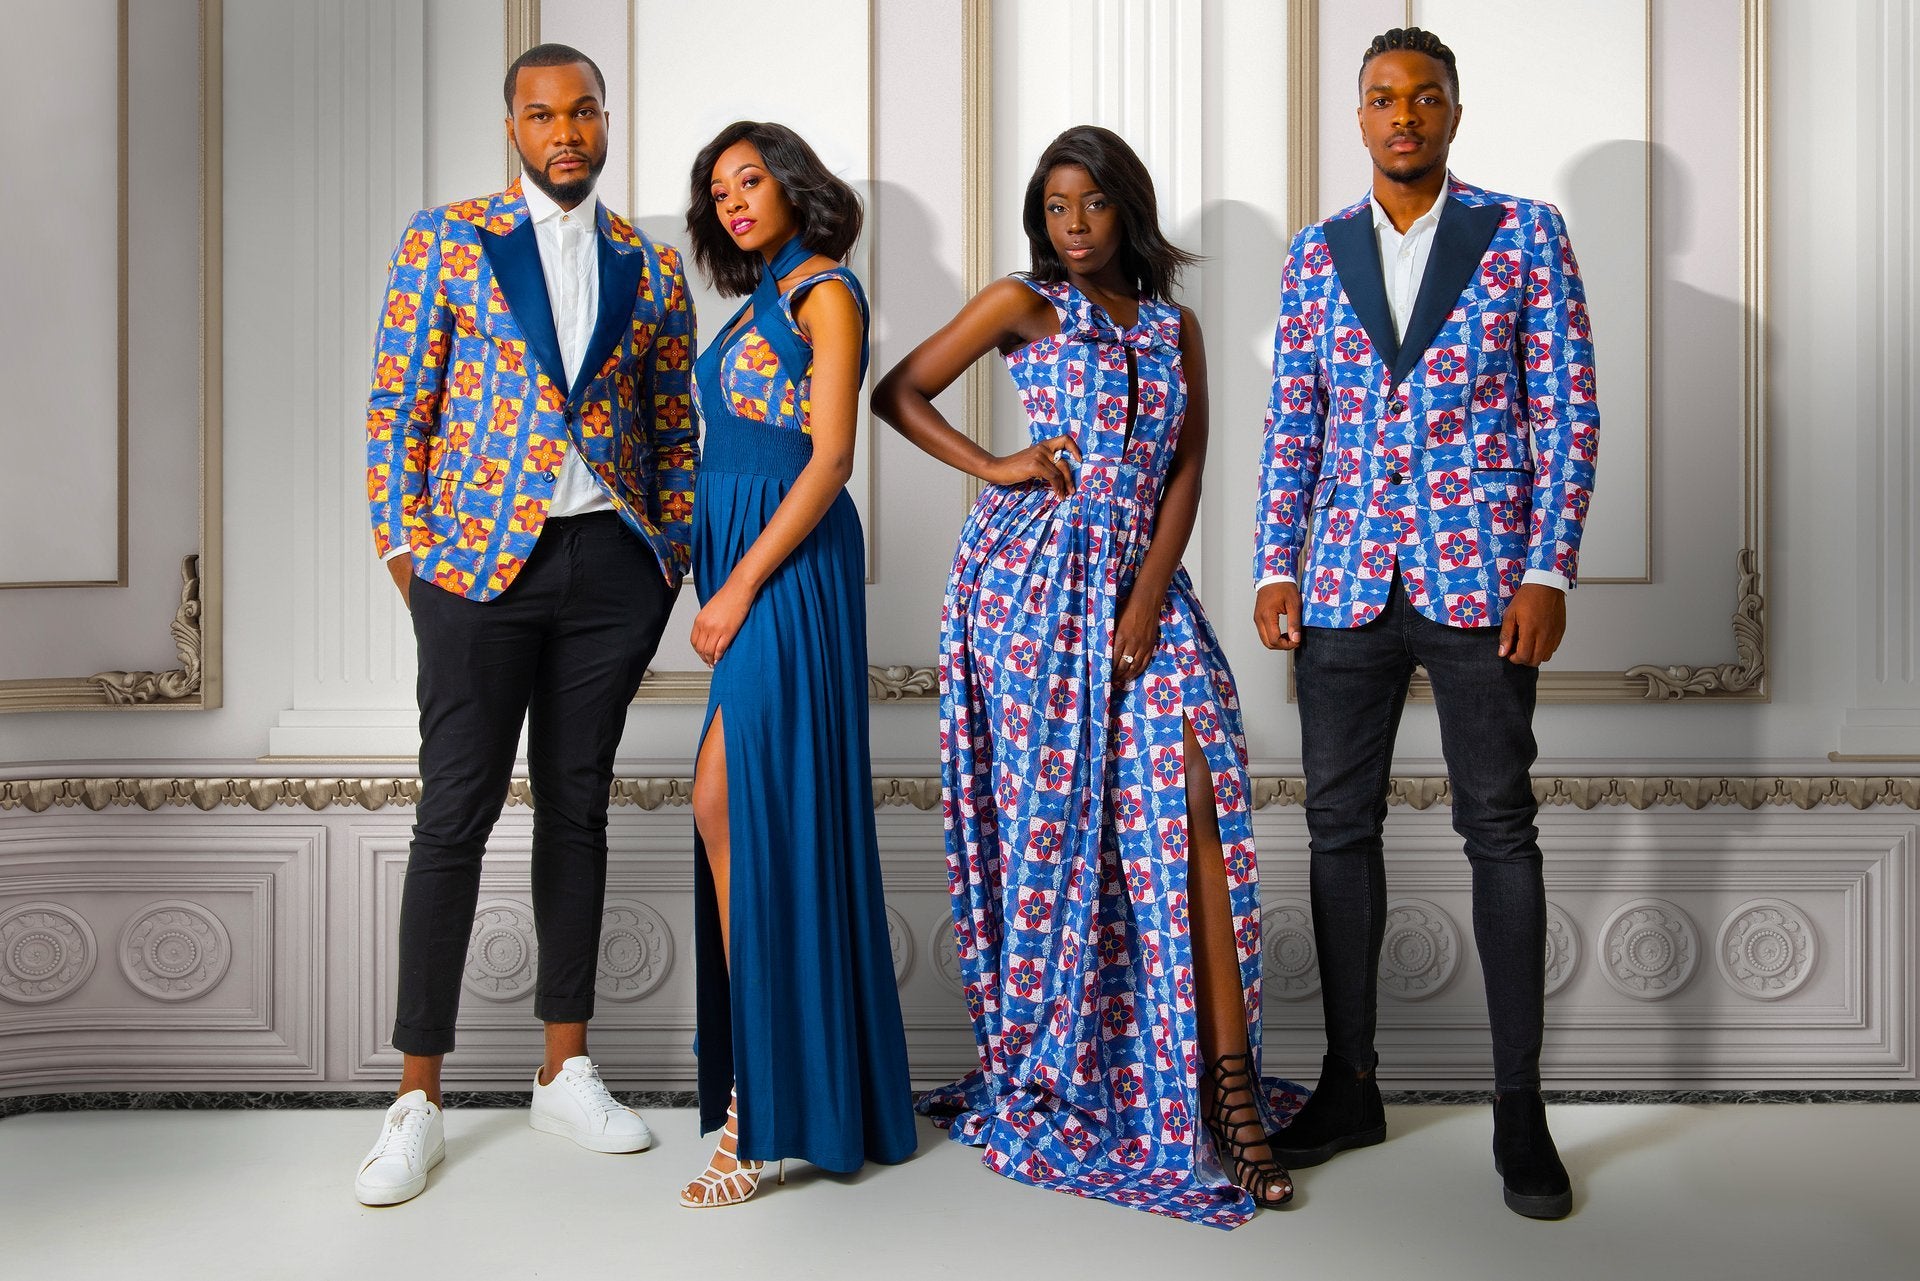 ALLEON African Fashion Collection - Arican Clothing including African Dresses, African Skirts, African Print Dresses, and more african prints products